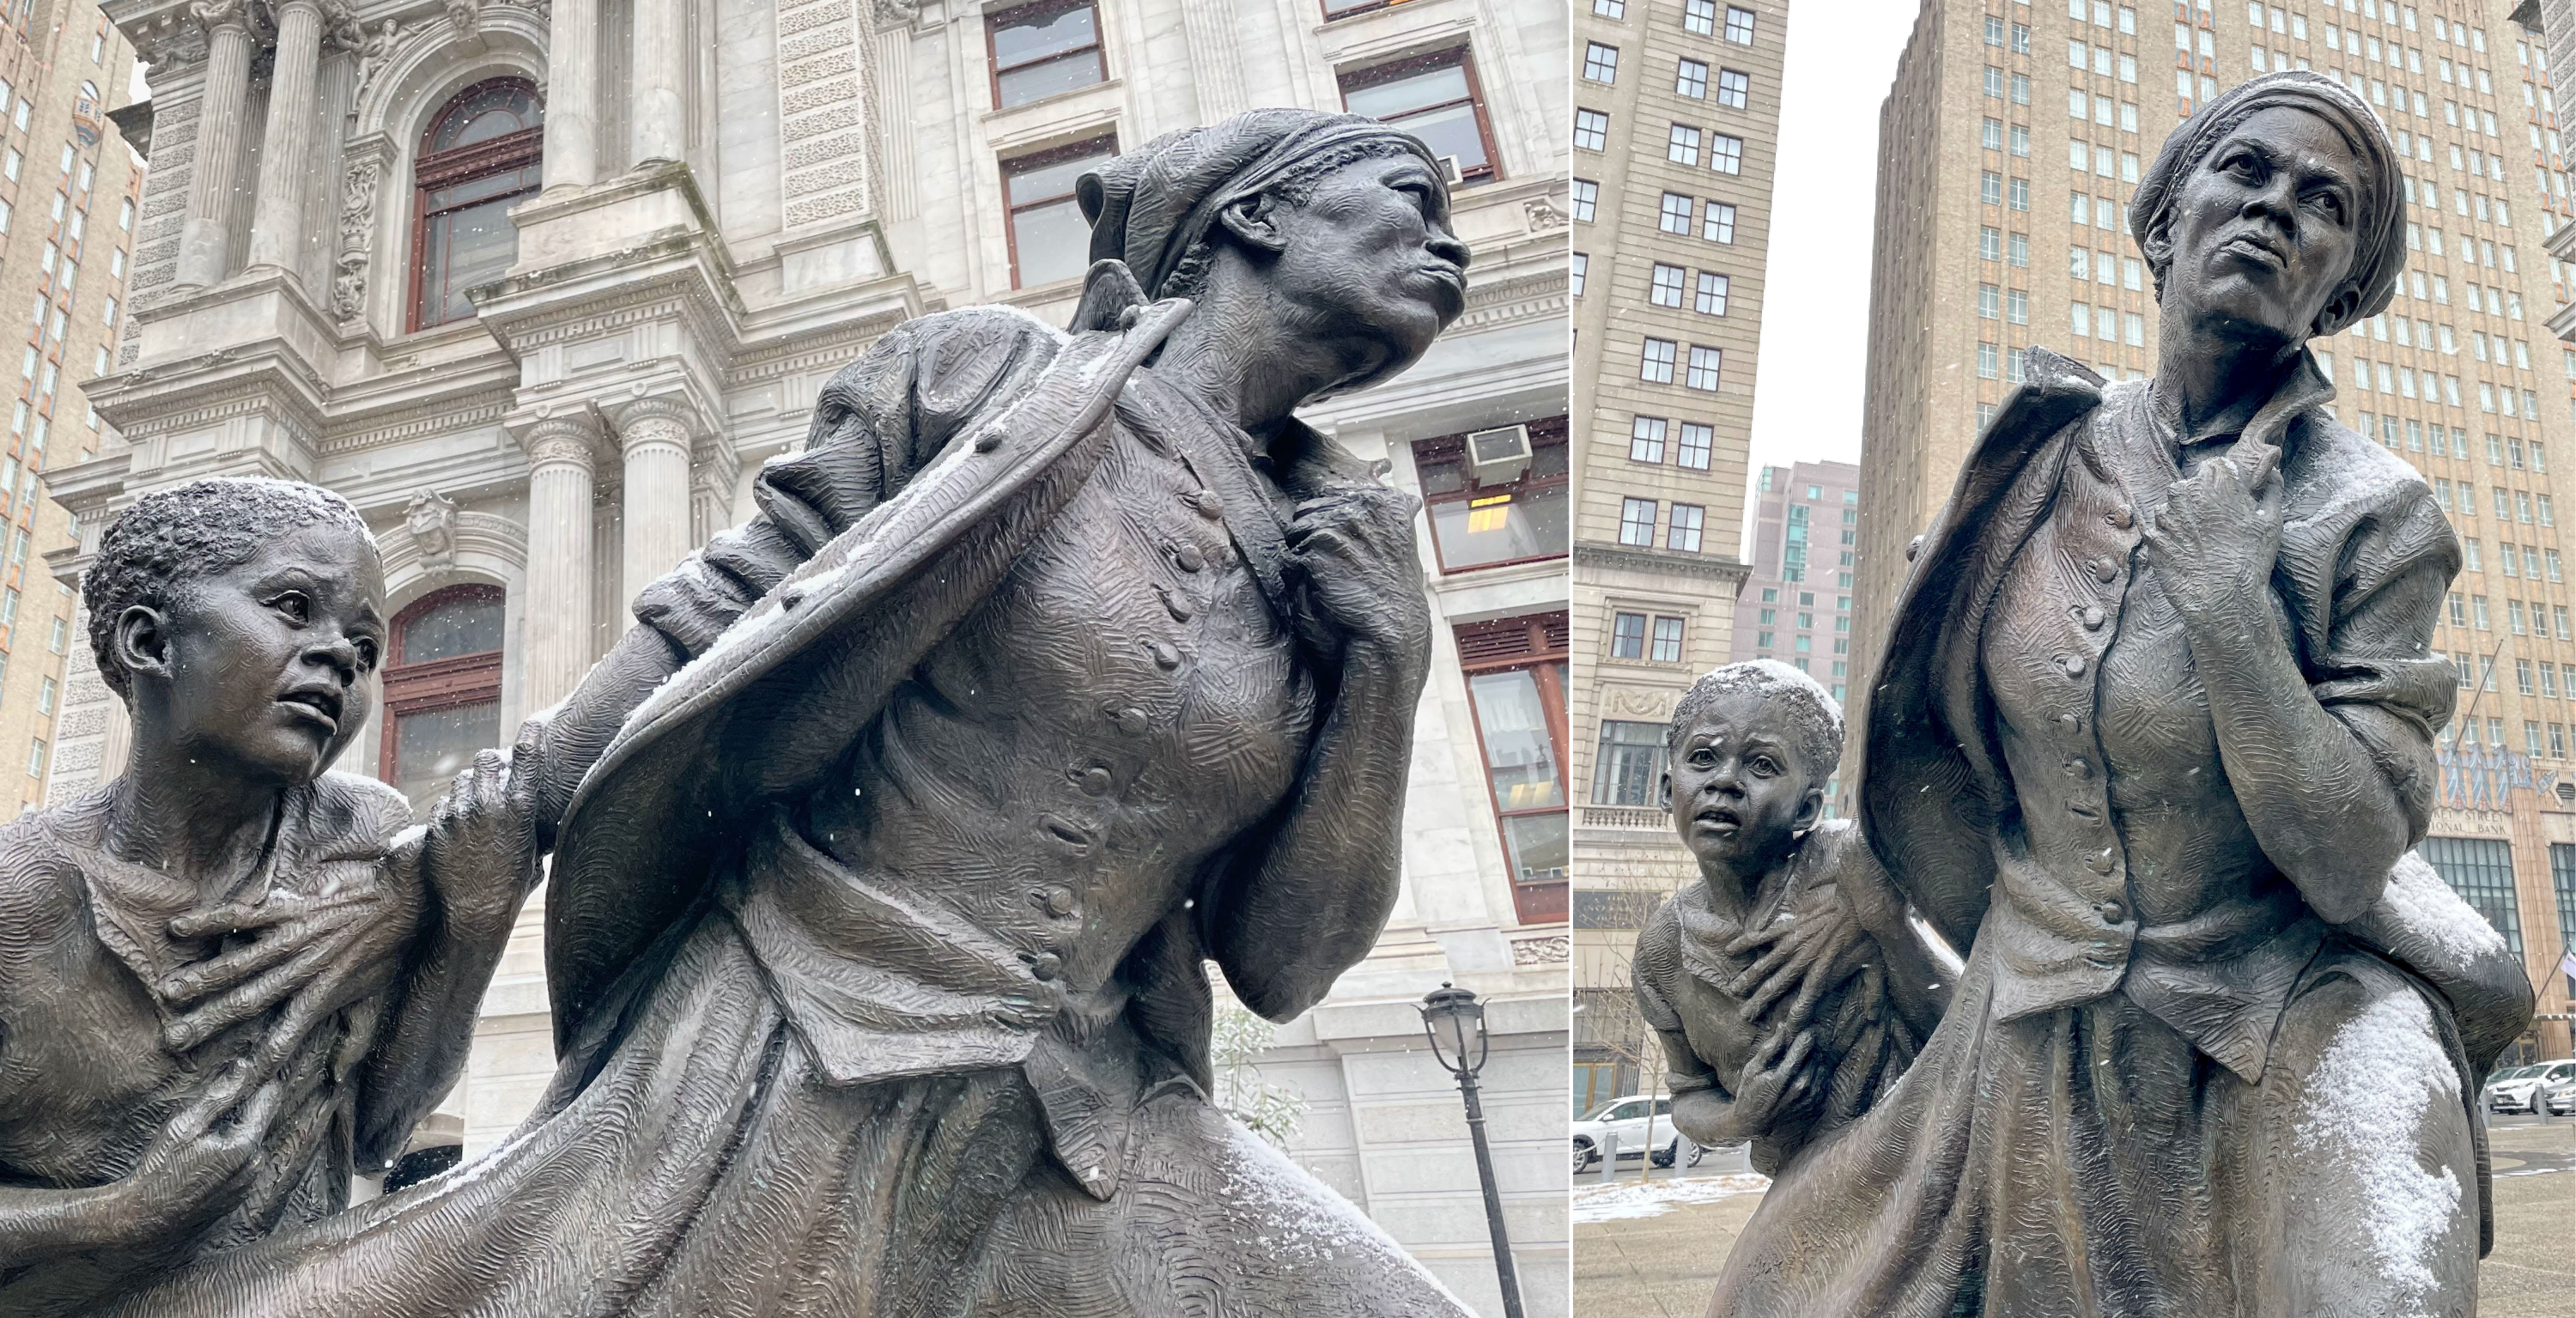 A bronze sculpture of a determined Harriet Tubman helping a young boy in front of Philadelphia's City Hall. It's a grey and wintery day in the city.